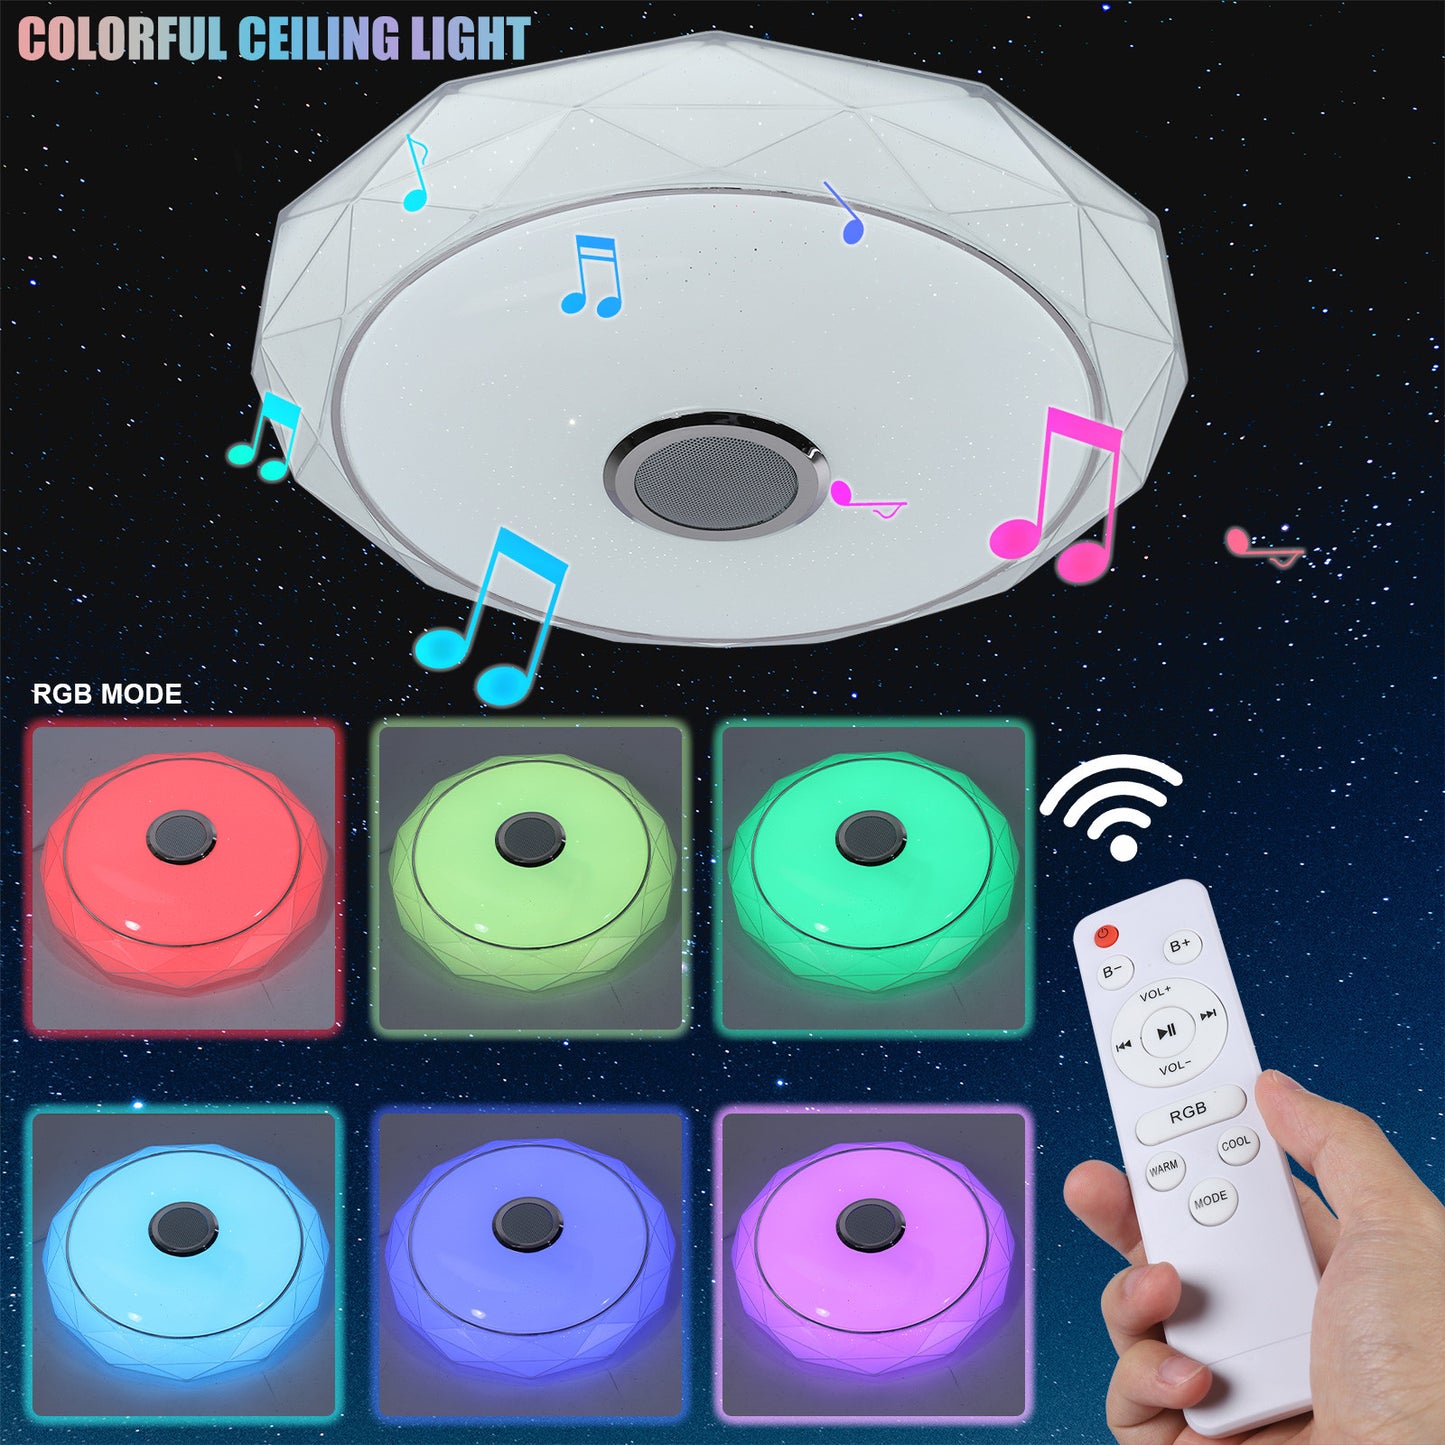 RGB Ceiling Light With Multifunctional Bluetooth Speaker For Bedroom Smart Light